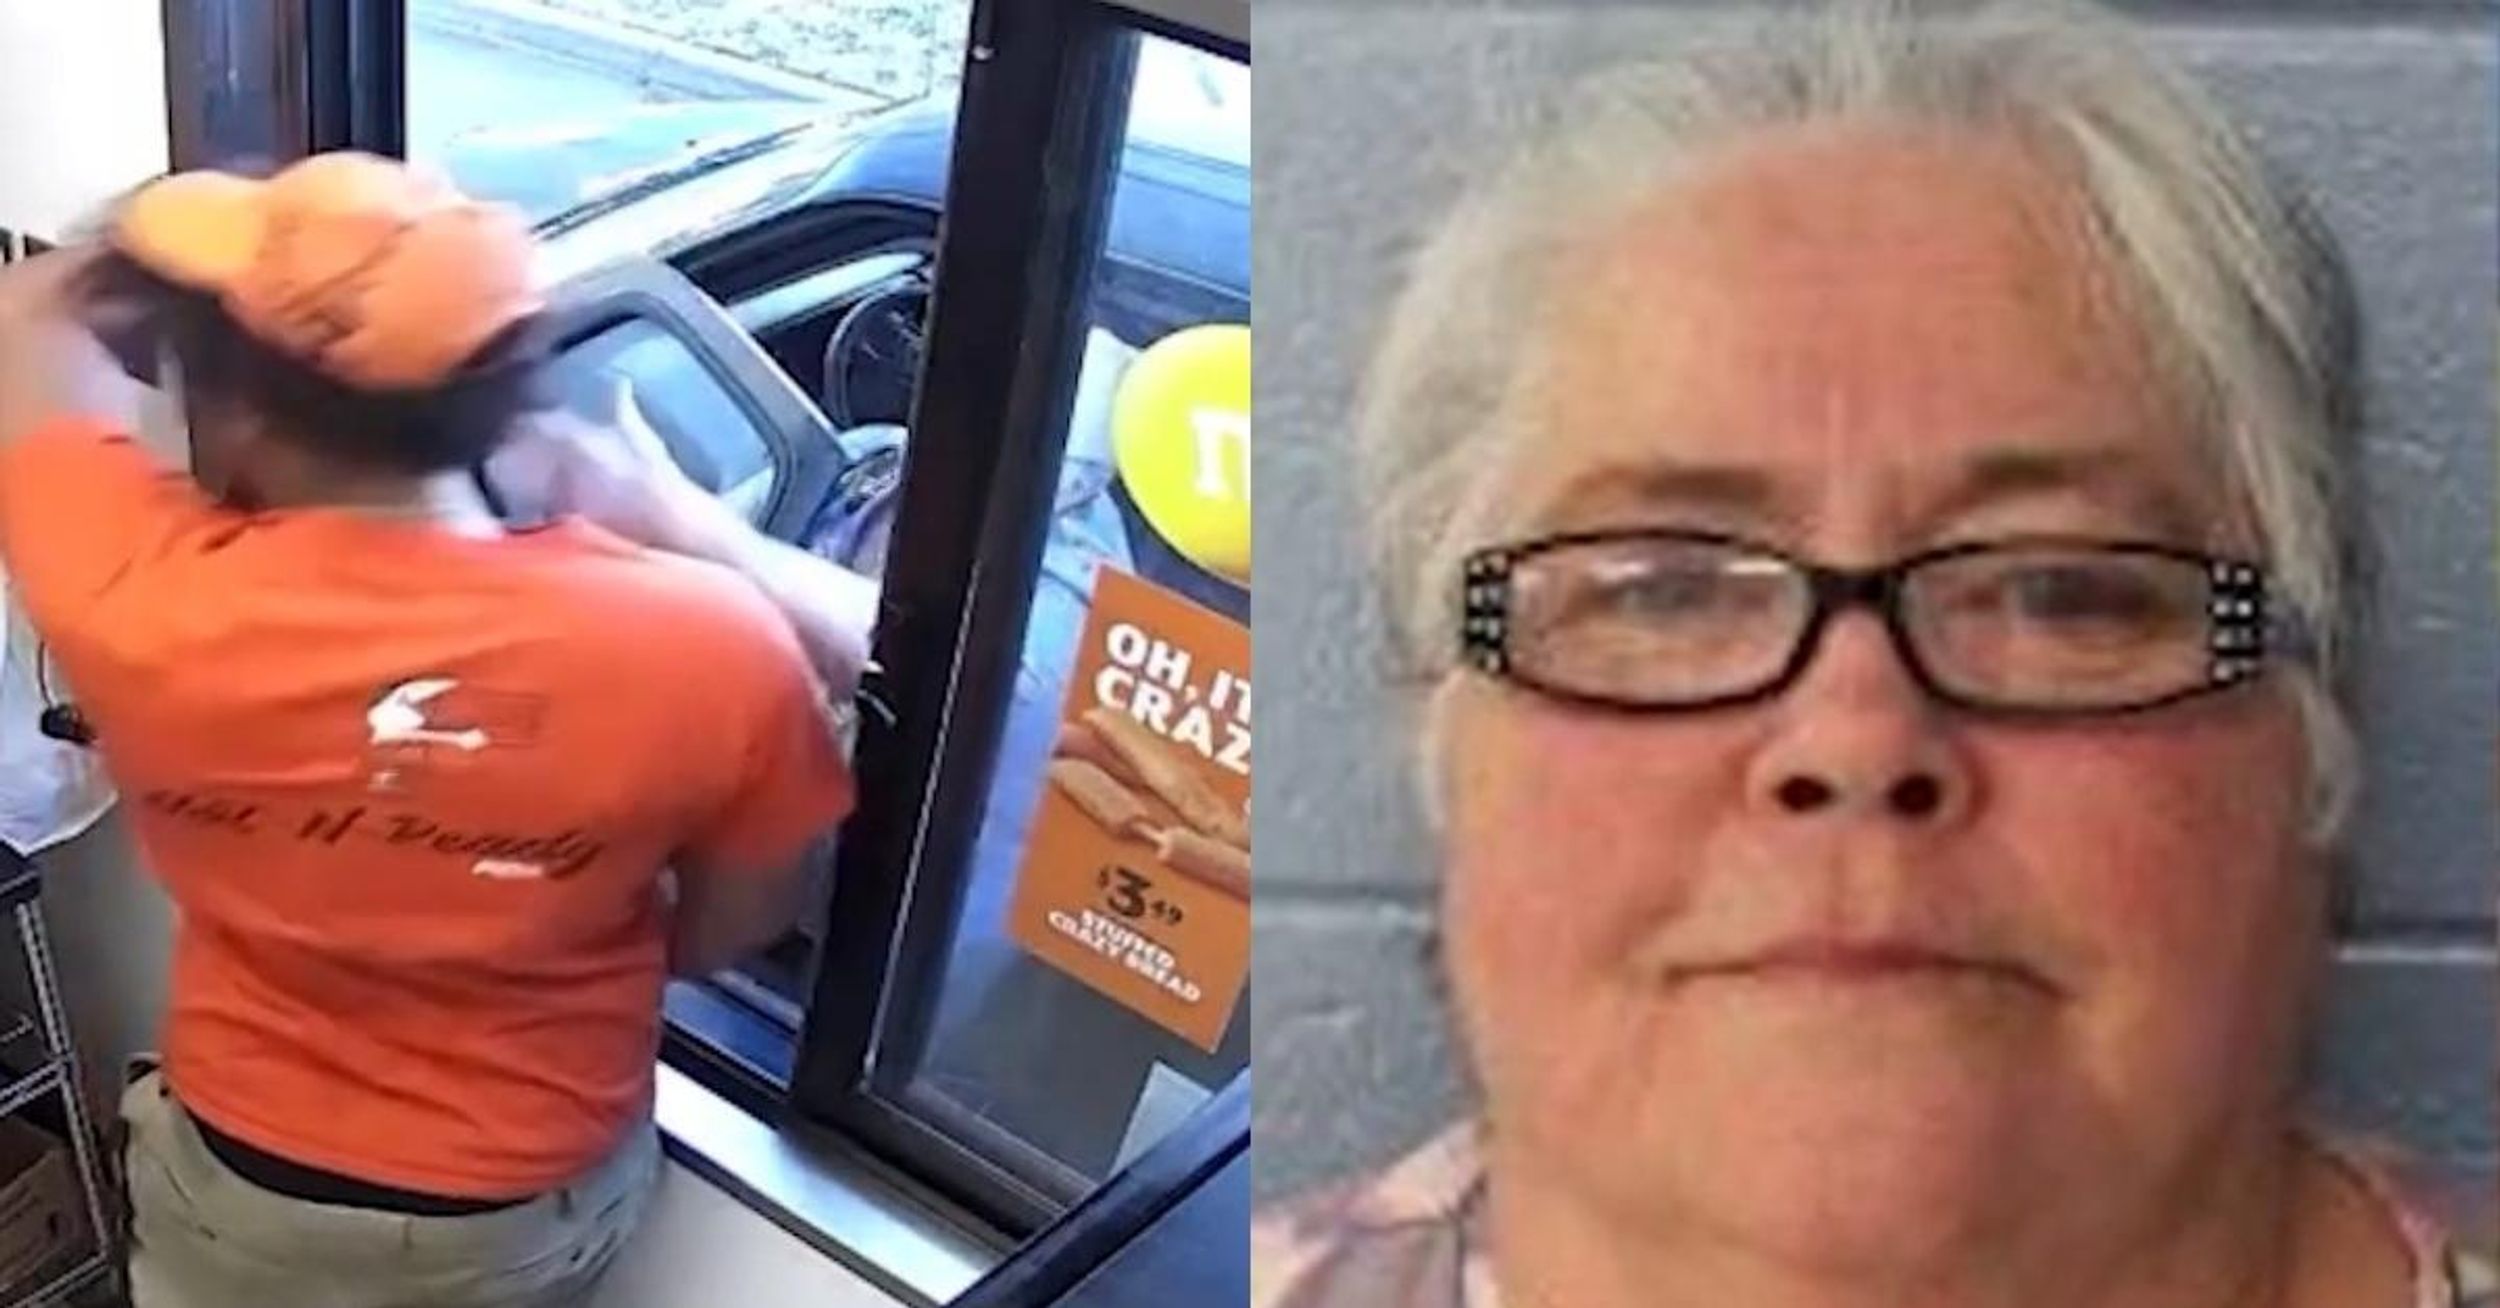 Oklahoma Woman Charged With Hate Crime After Slapping Little Caesars Worker Over Crazy Bread